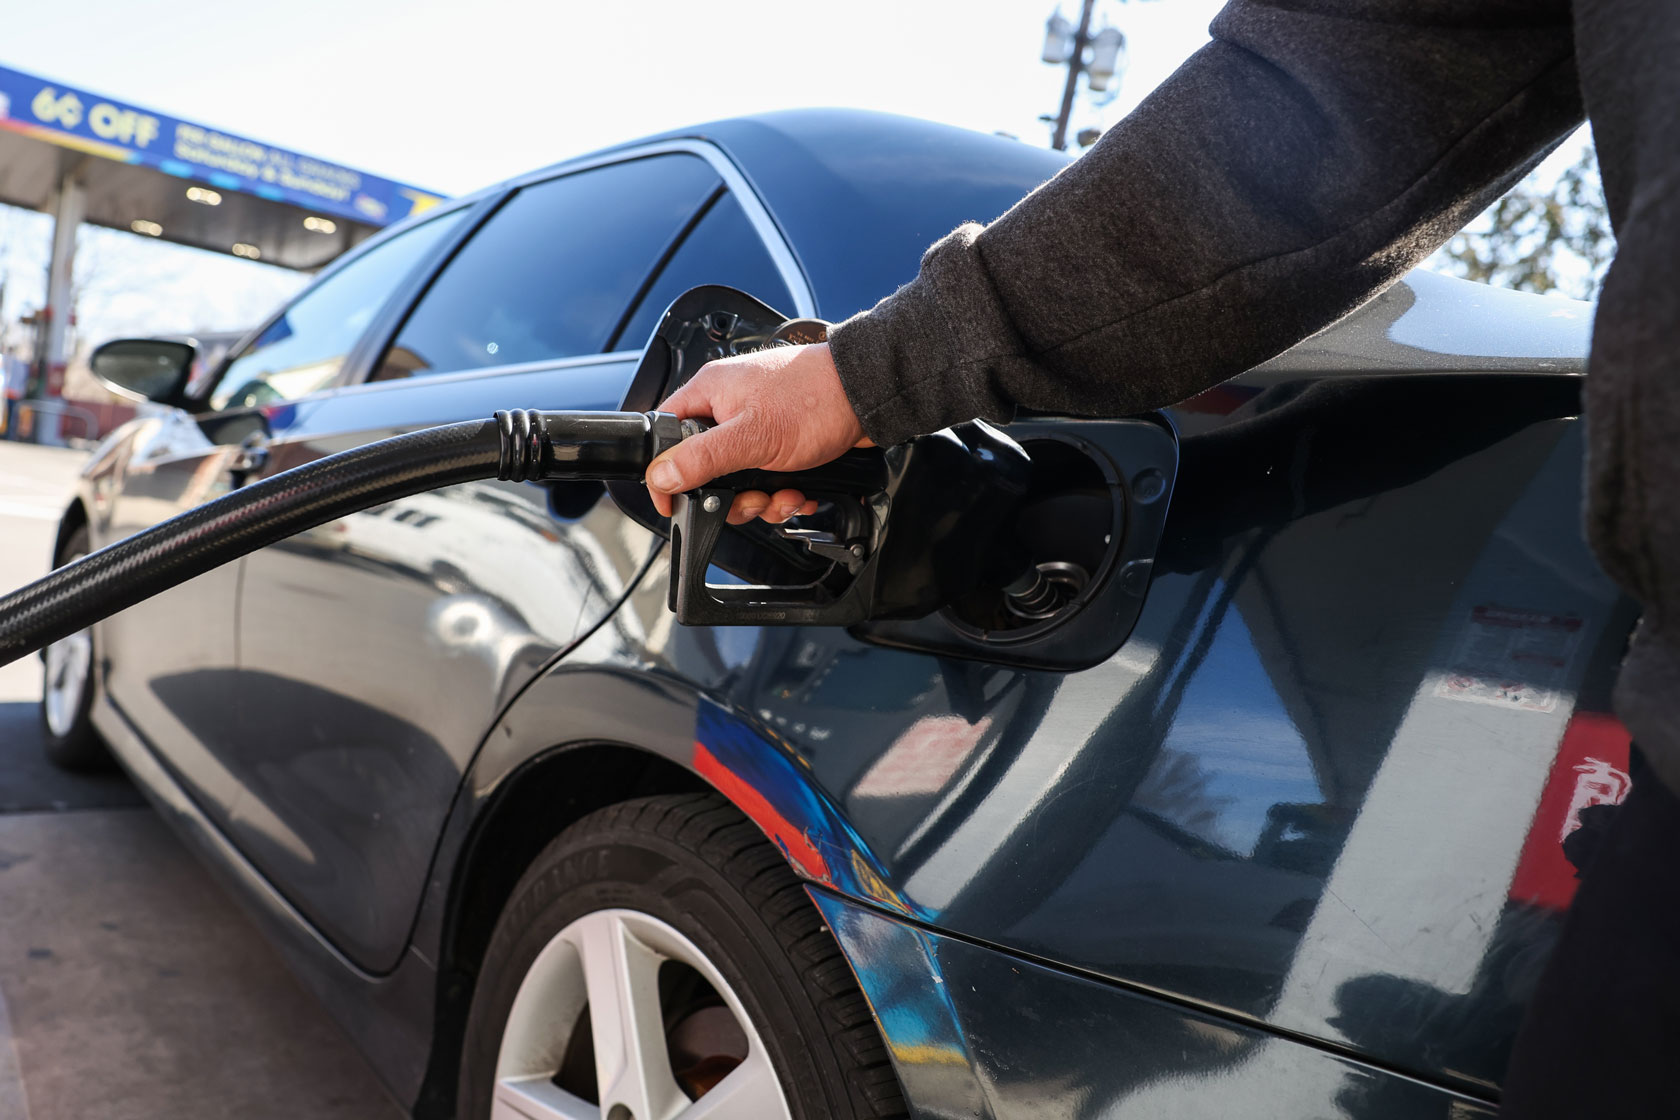 A hand is seen holding a gas pump nozzle up to the gas tank of a black sedan.